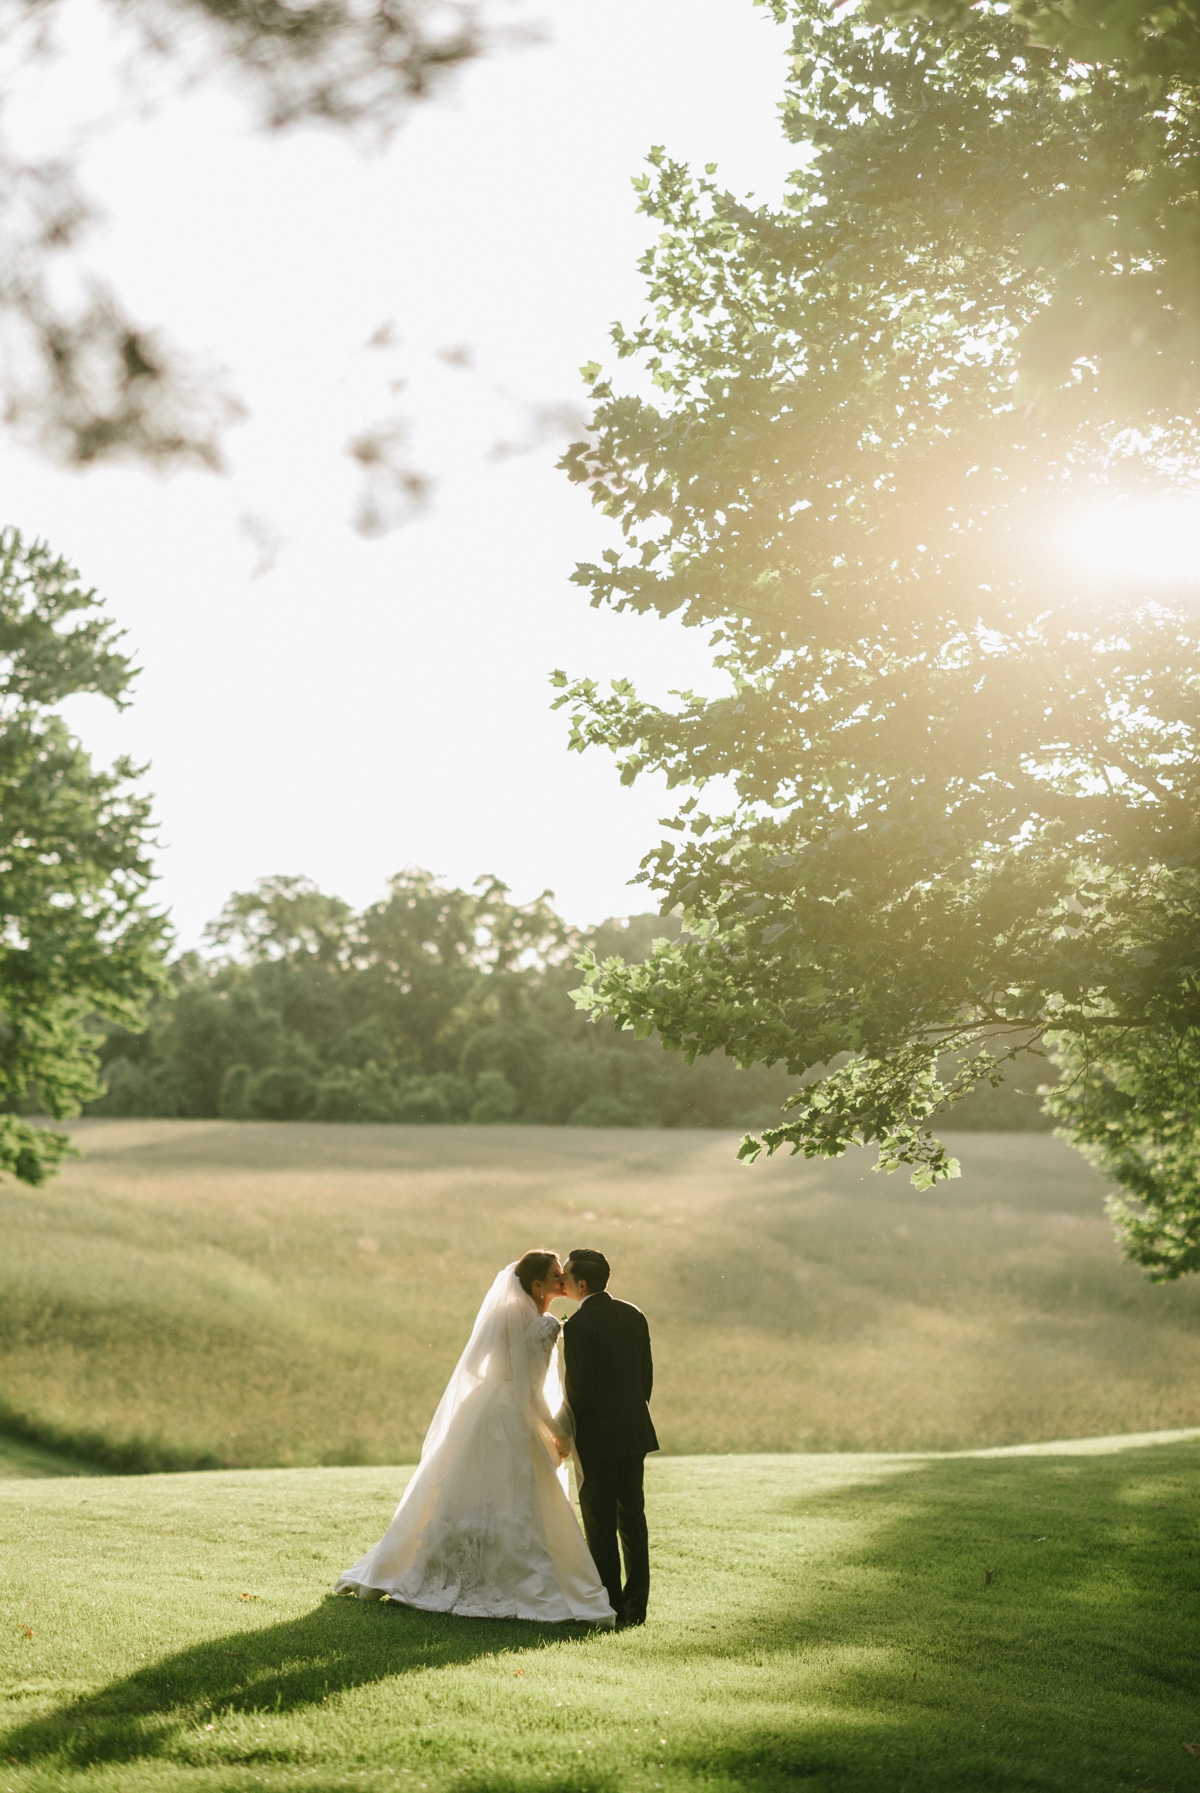 Bride and Groom Kissing Outdoors at Sunset at The Ashford Estate